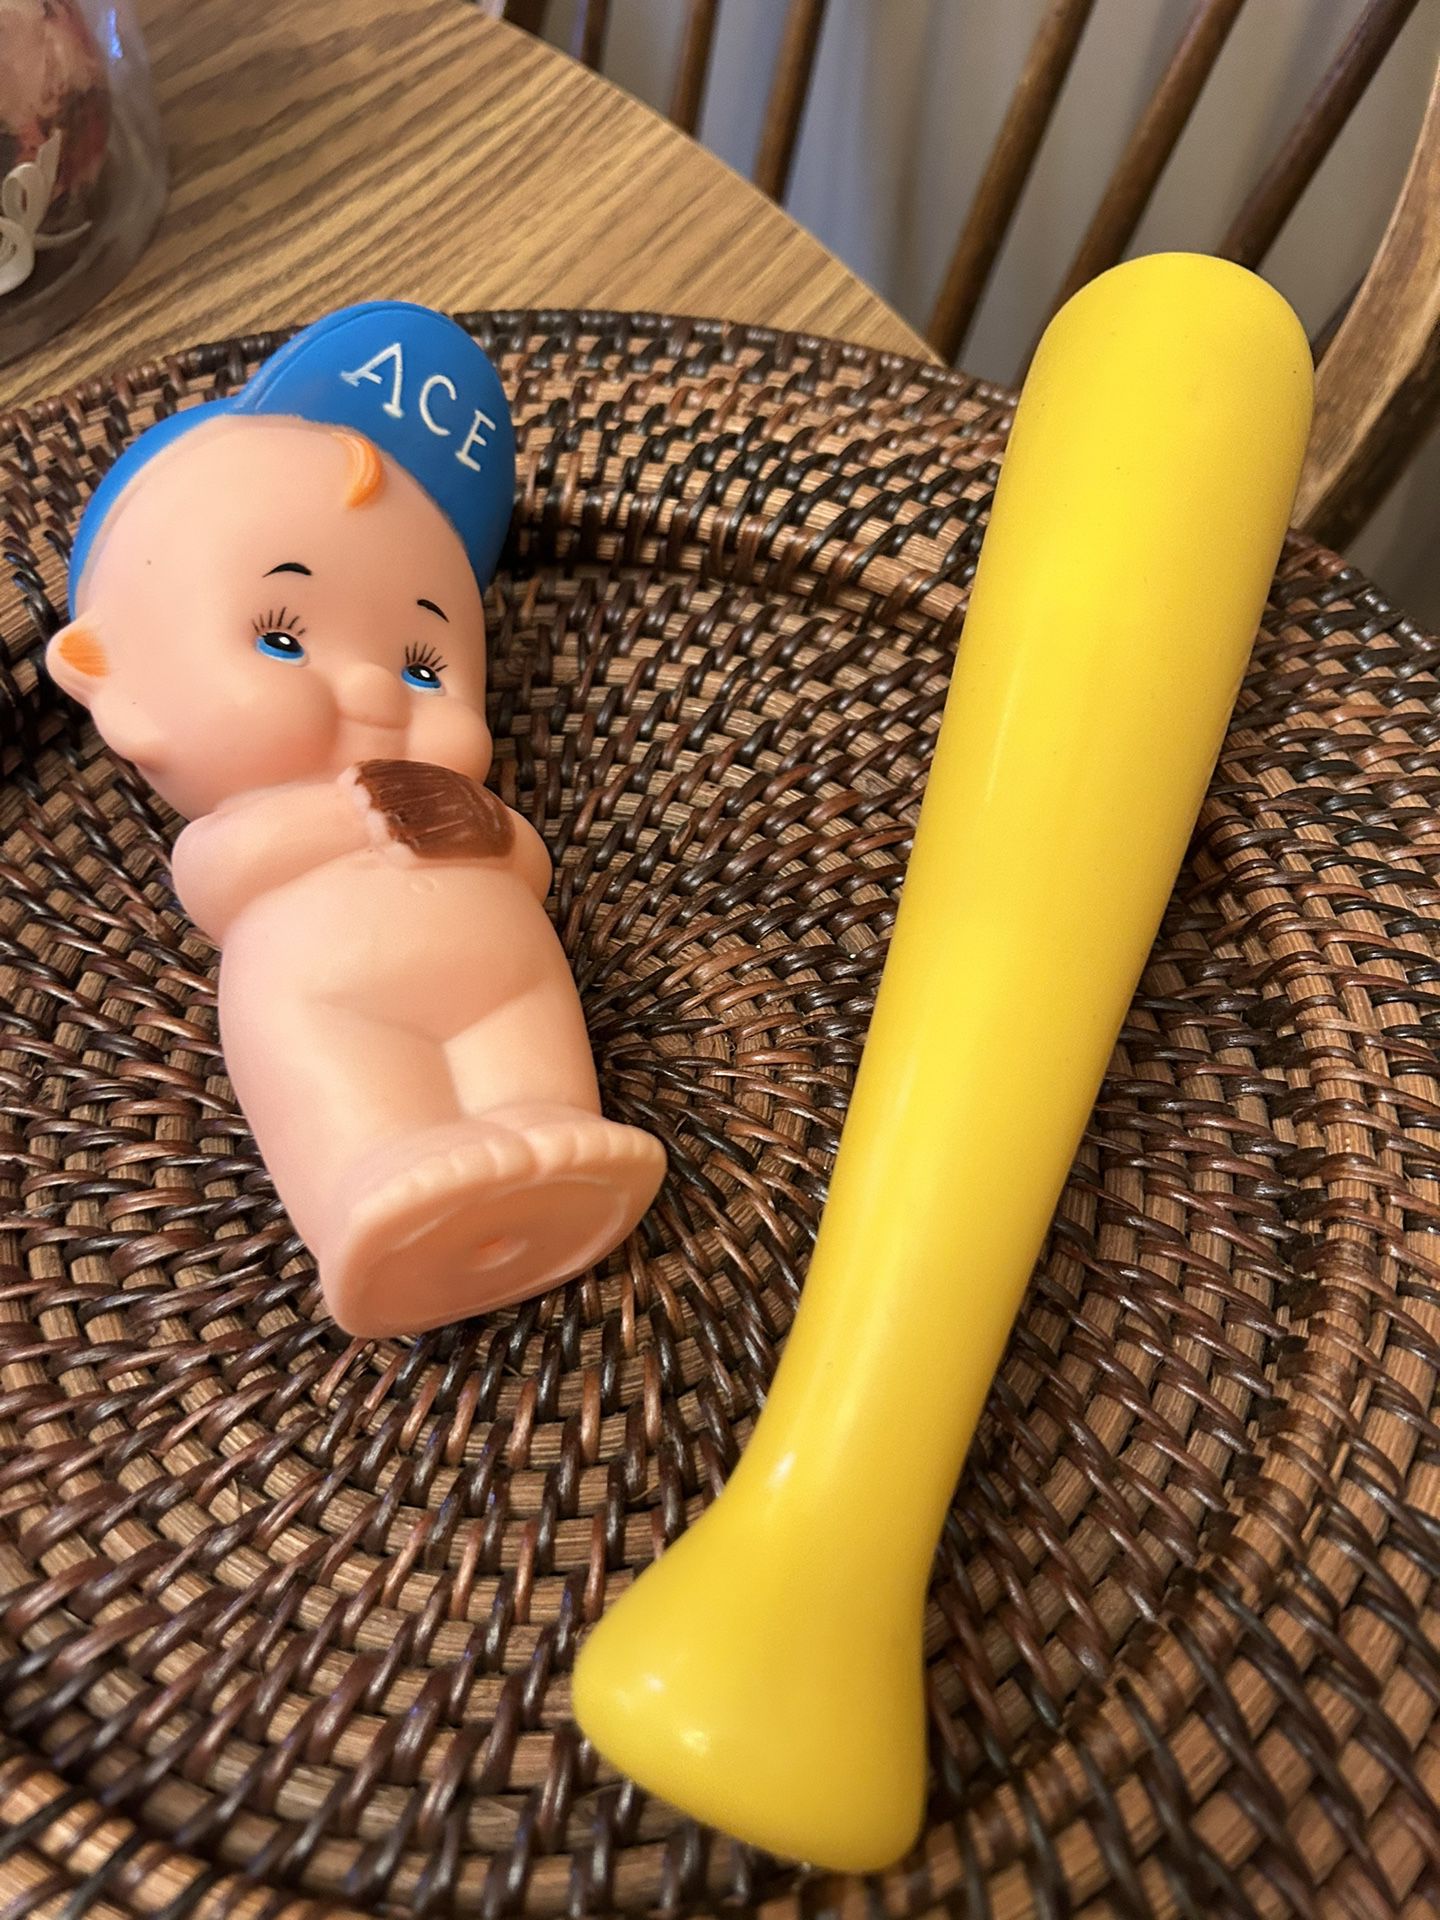 Vintage baby squeak toys - baseball player Ace and yellow bat 